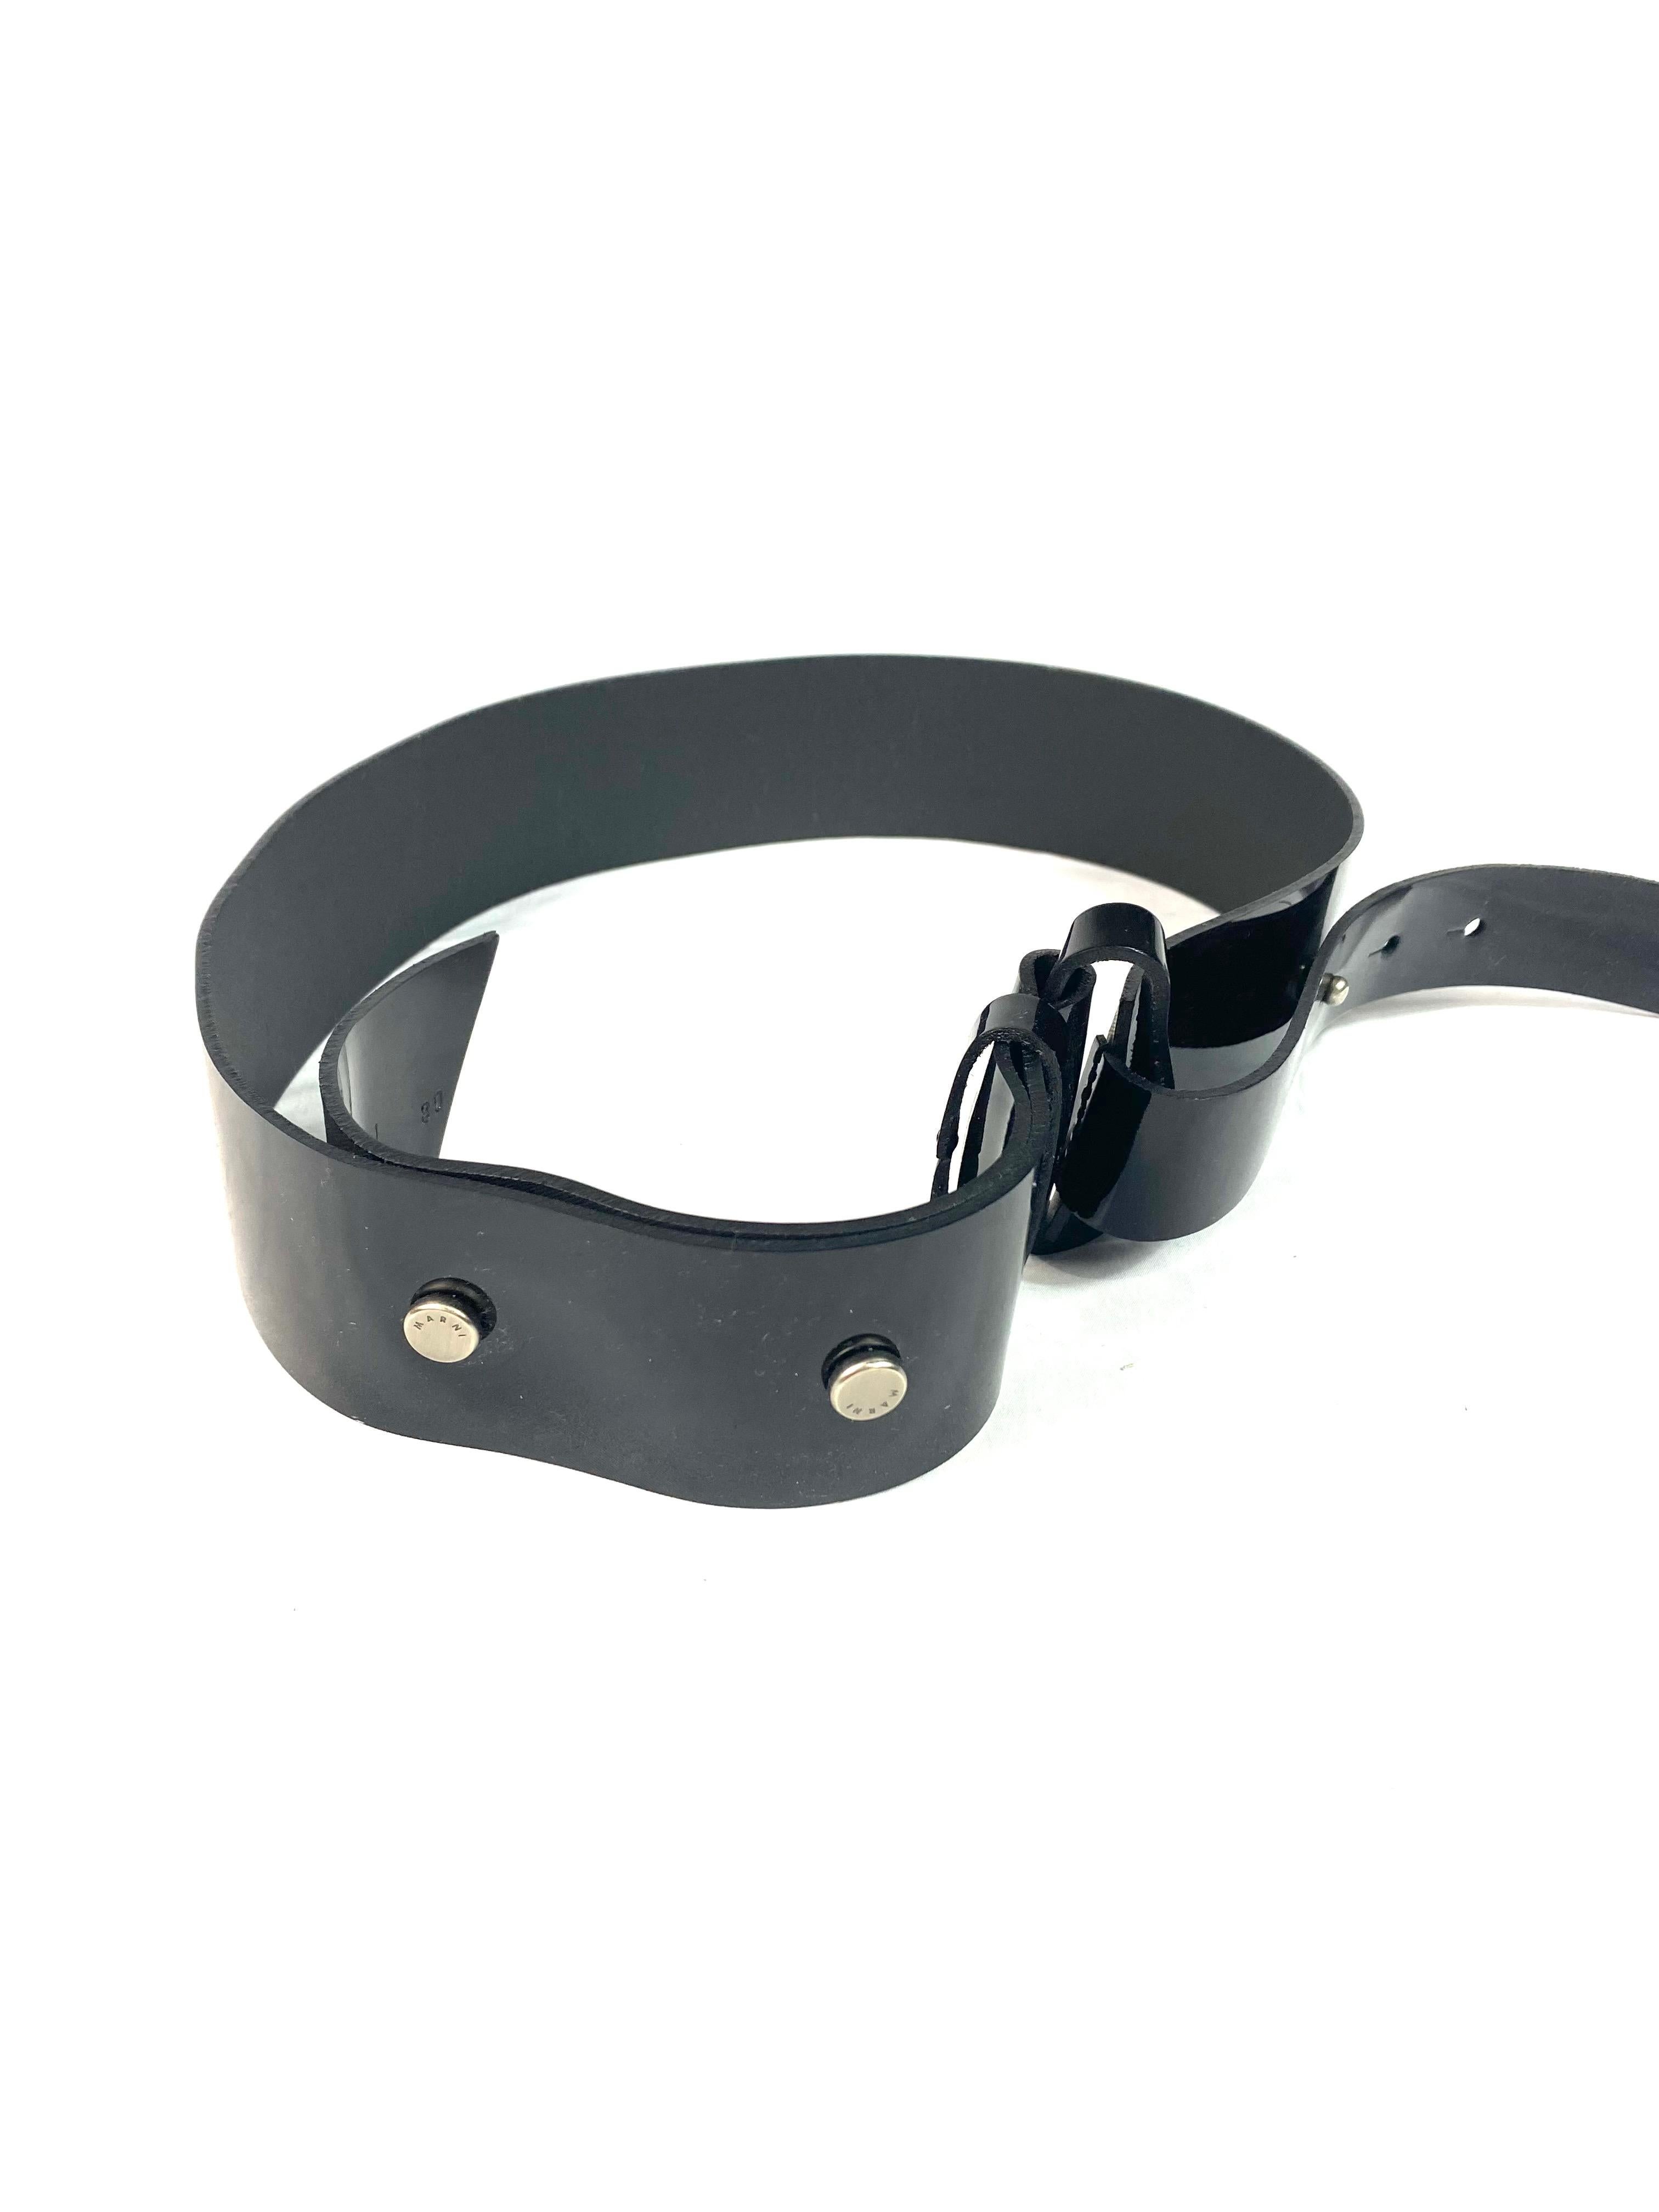 Product details:

The belt features shine finish with silver tone hardware and wide design.